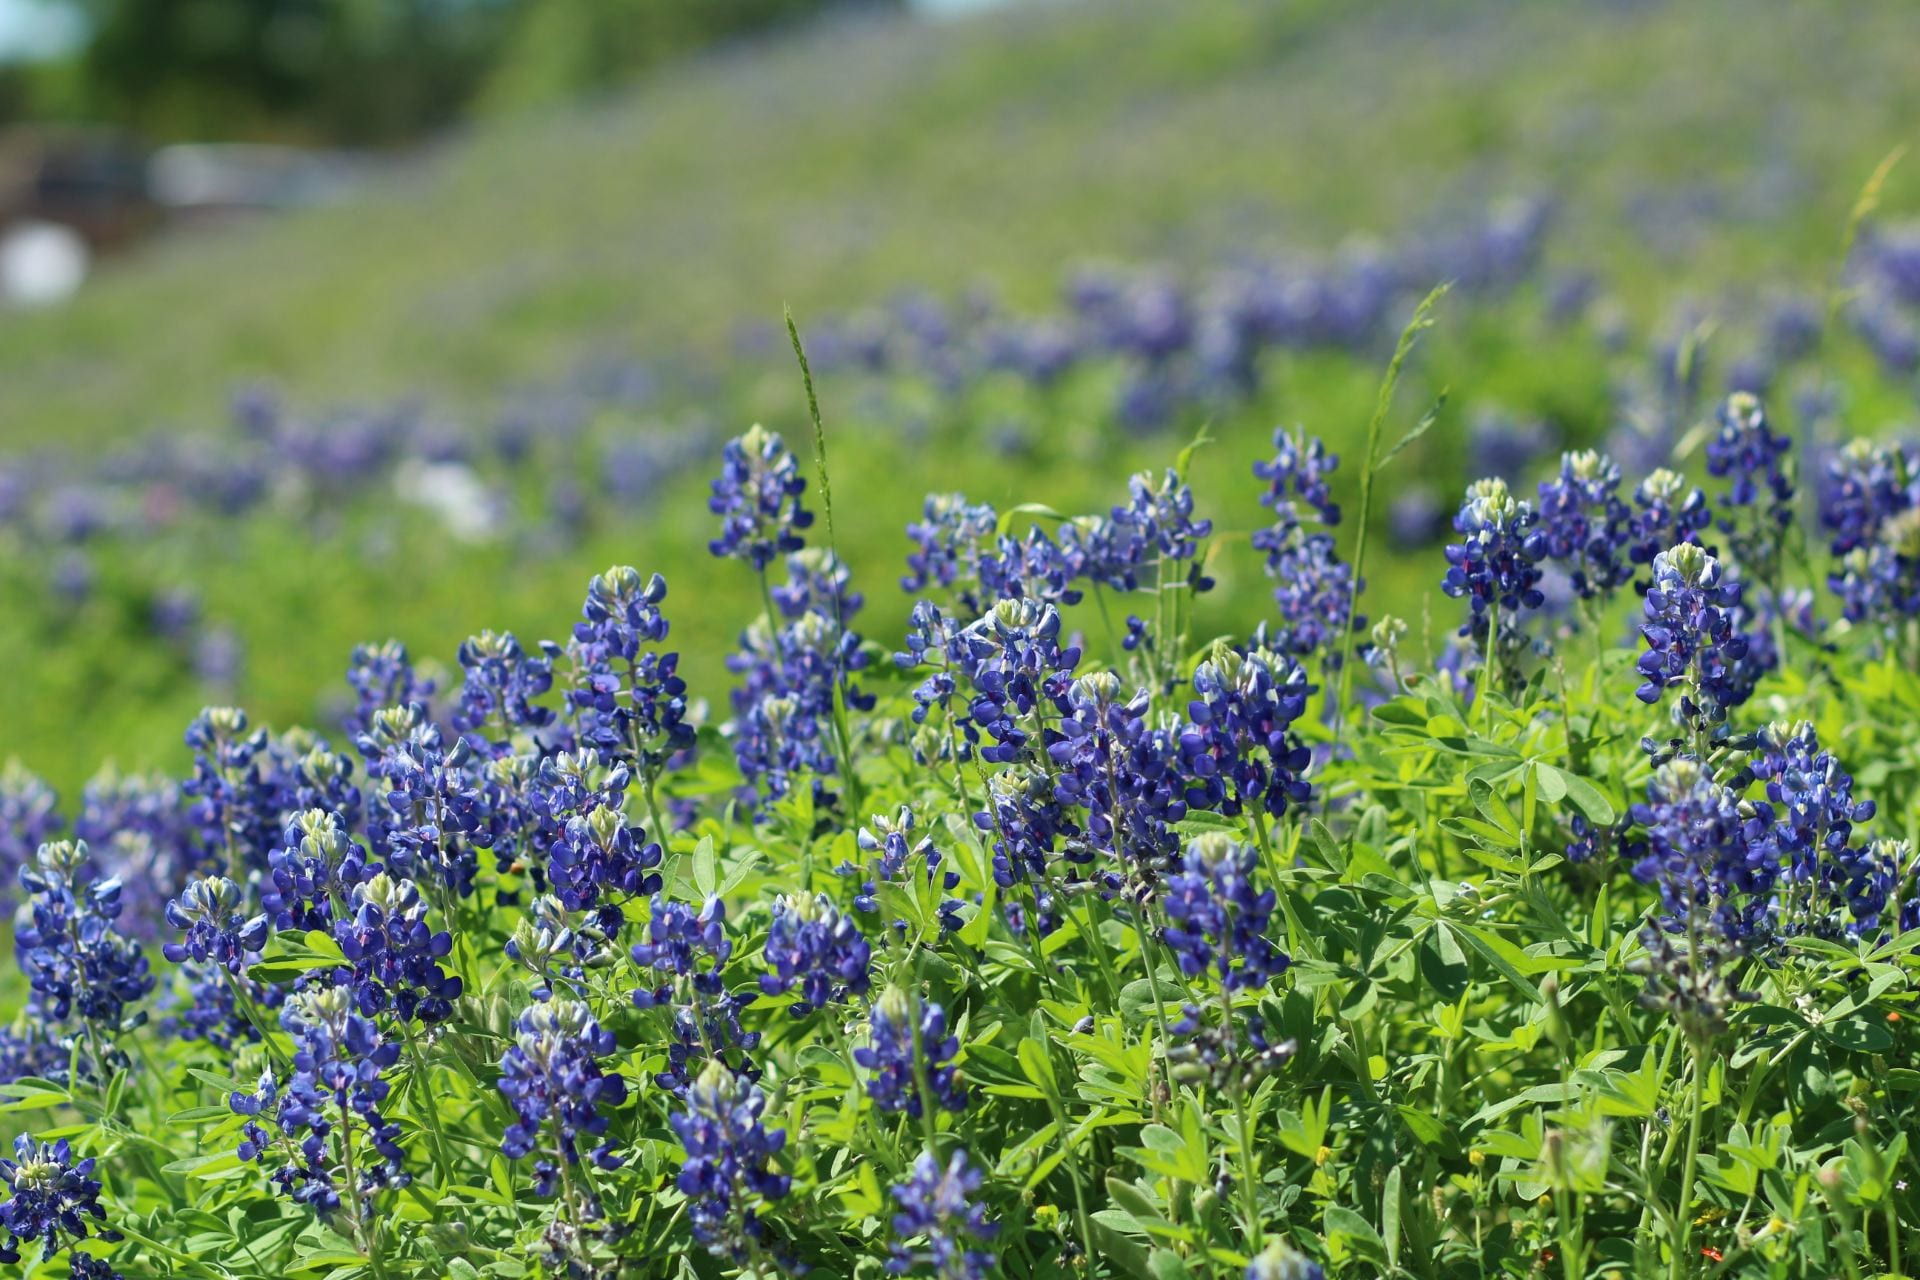 Bluebonnets covering a hill.